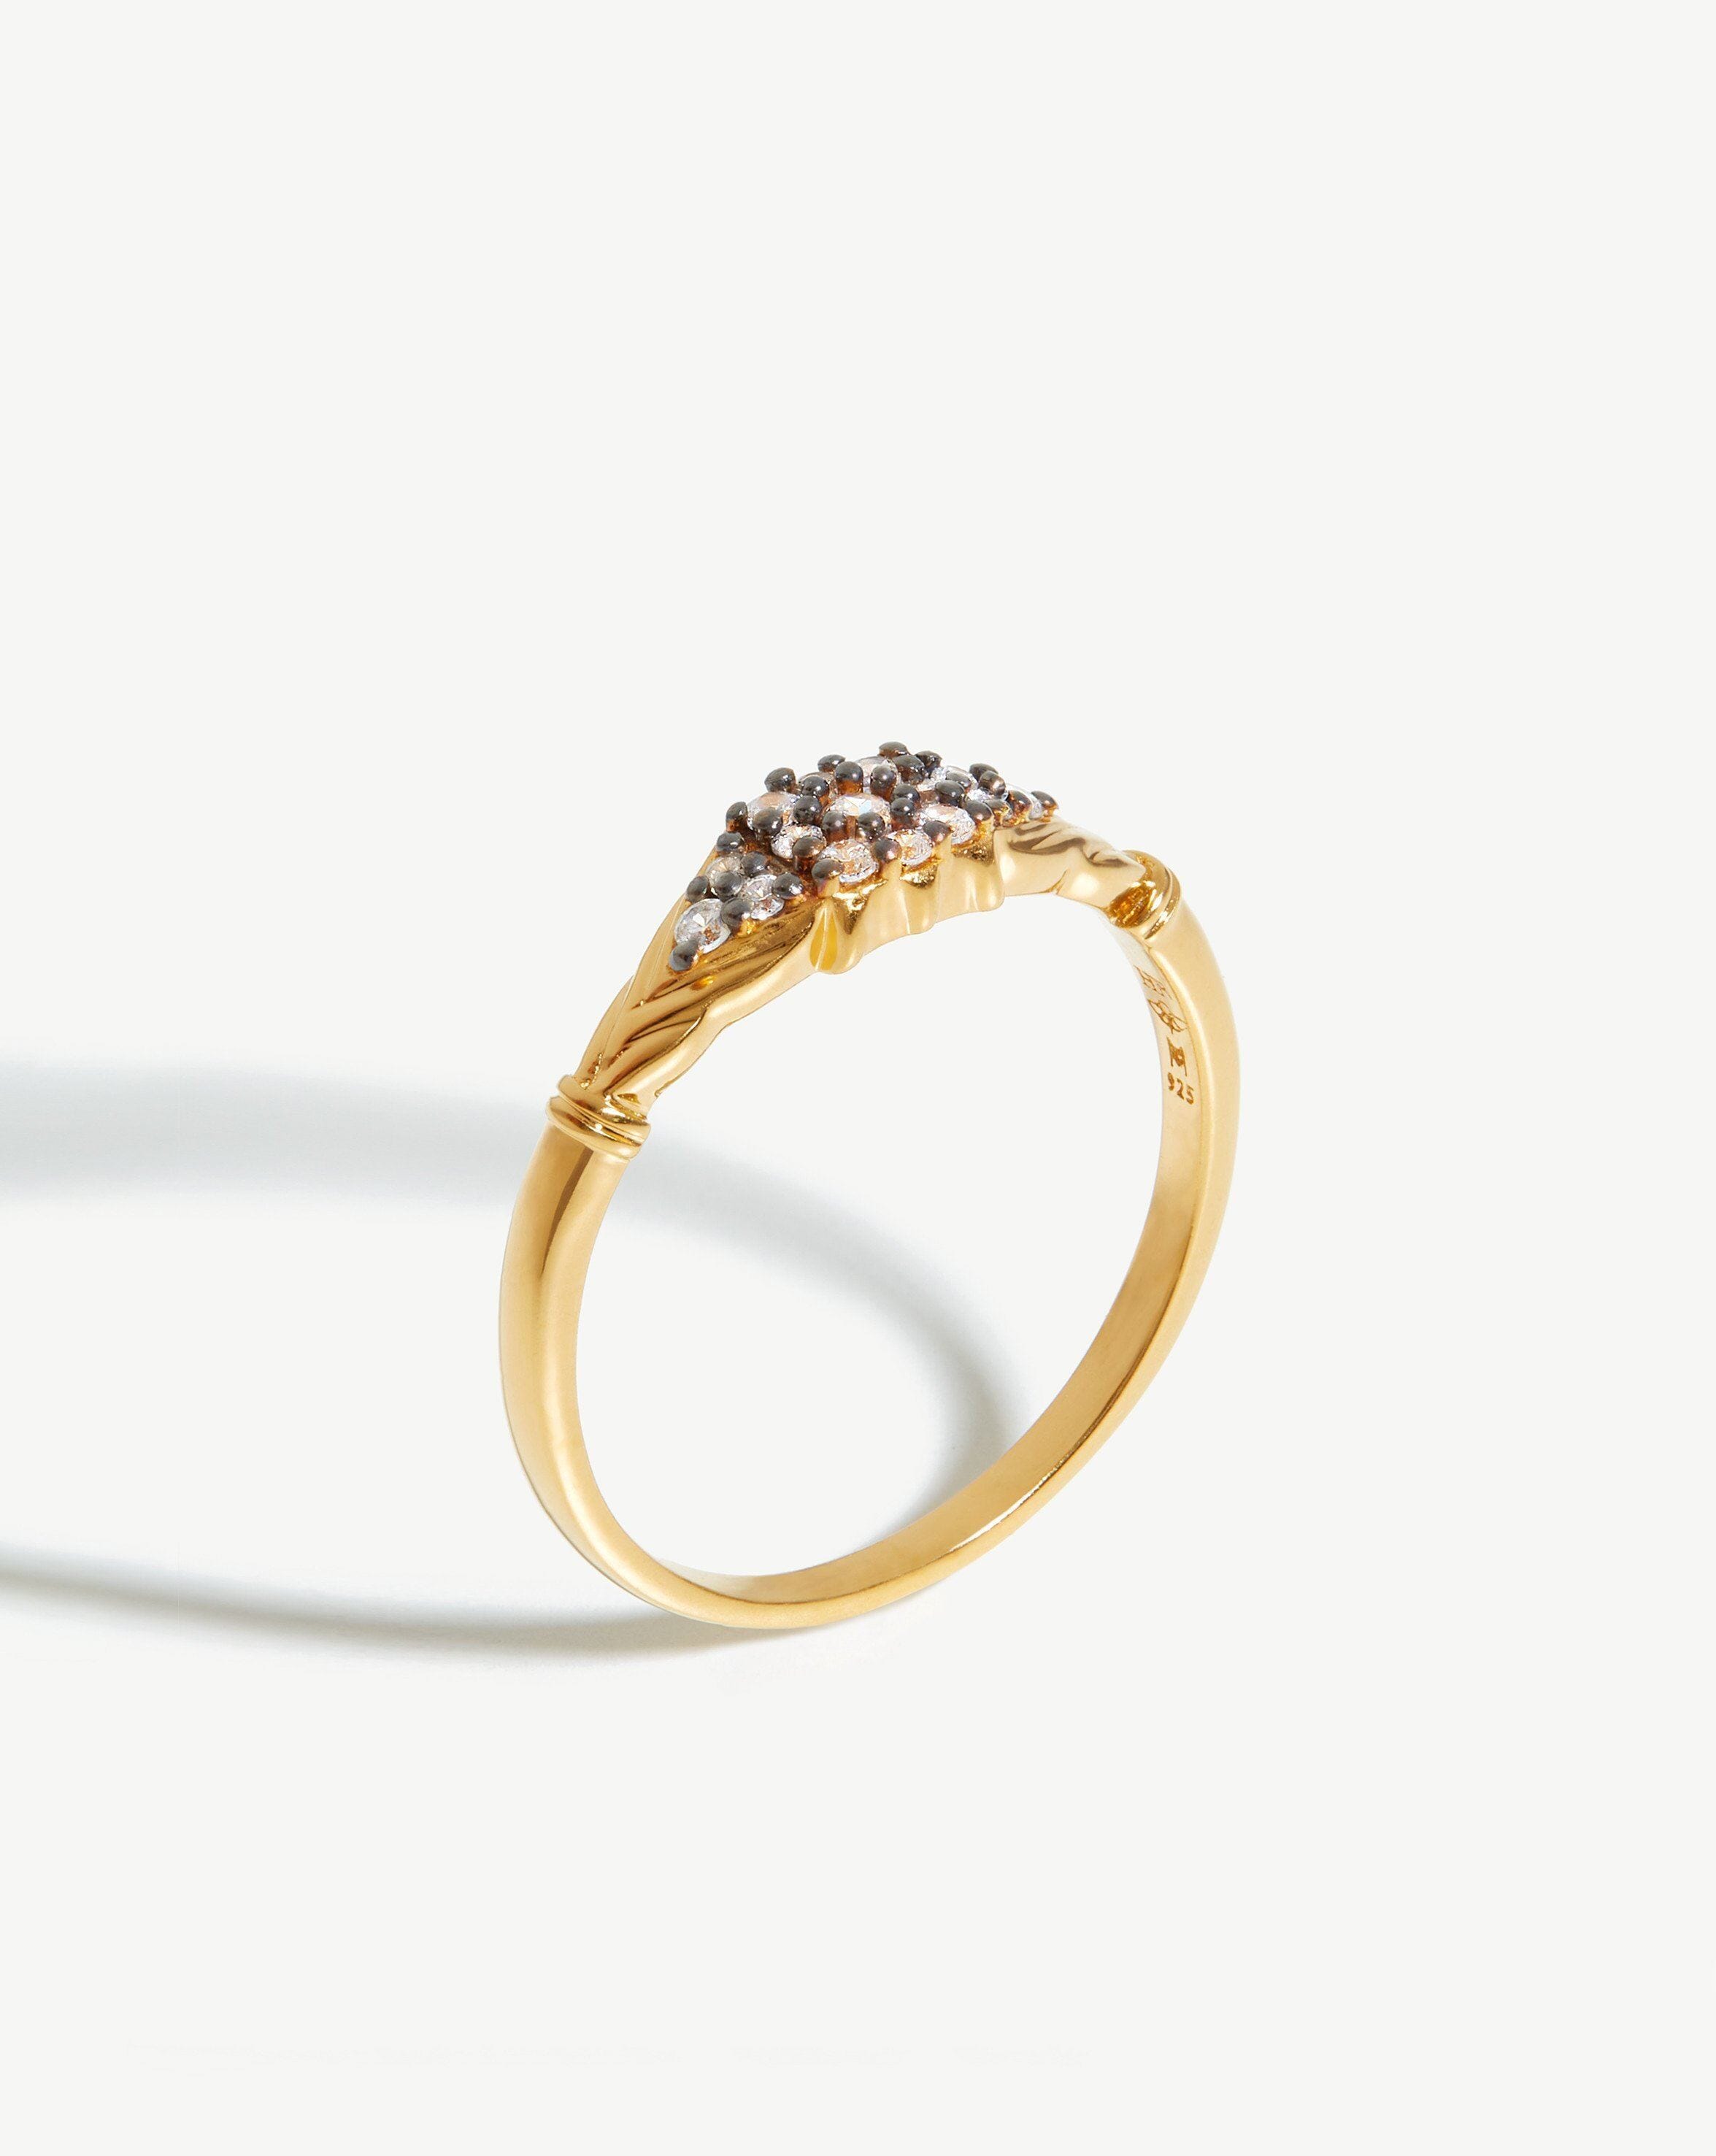 Harris Reed Gilded Pave Ring | 18ct Gold Plated Vermeil/Cubic Zirconia Rings Missoma 18ct Gold Plated Vermeil/Cubic Zirconia J 